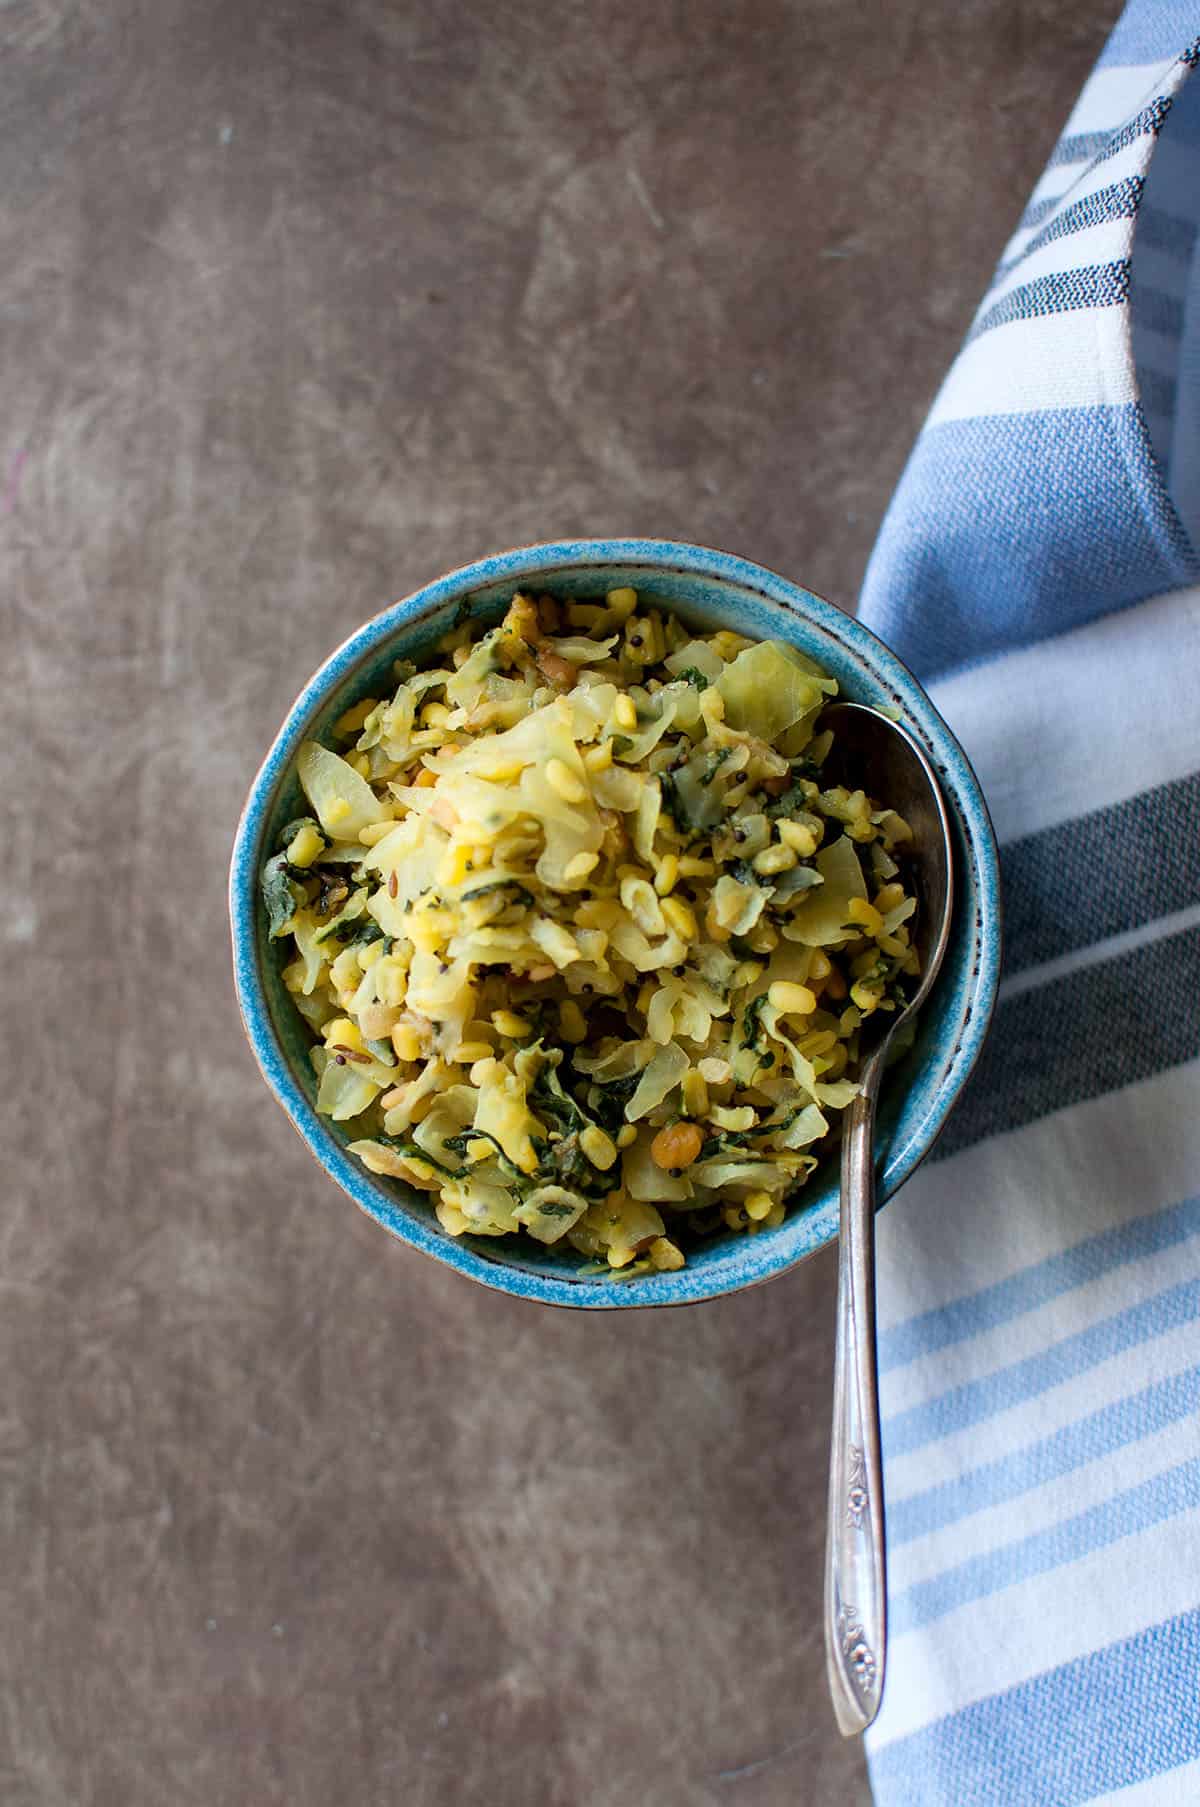 Blue bowl with cabbage spinach recipe.